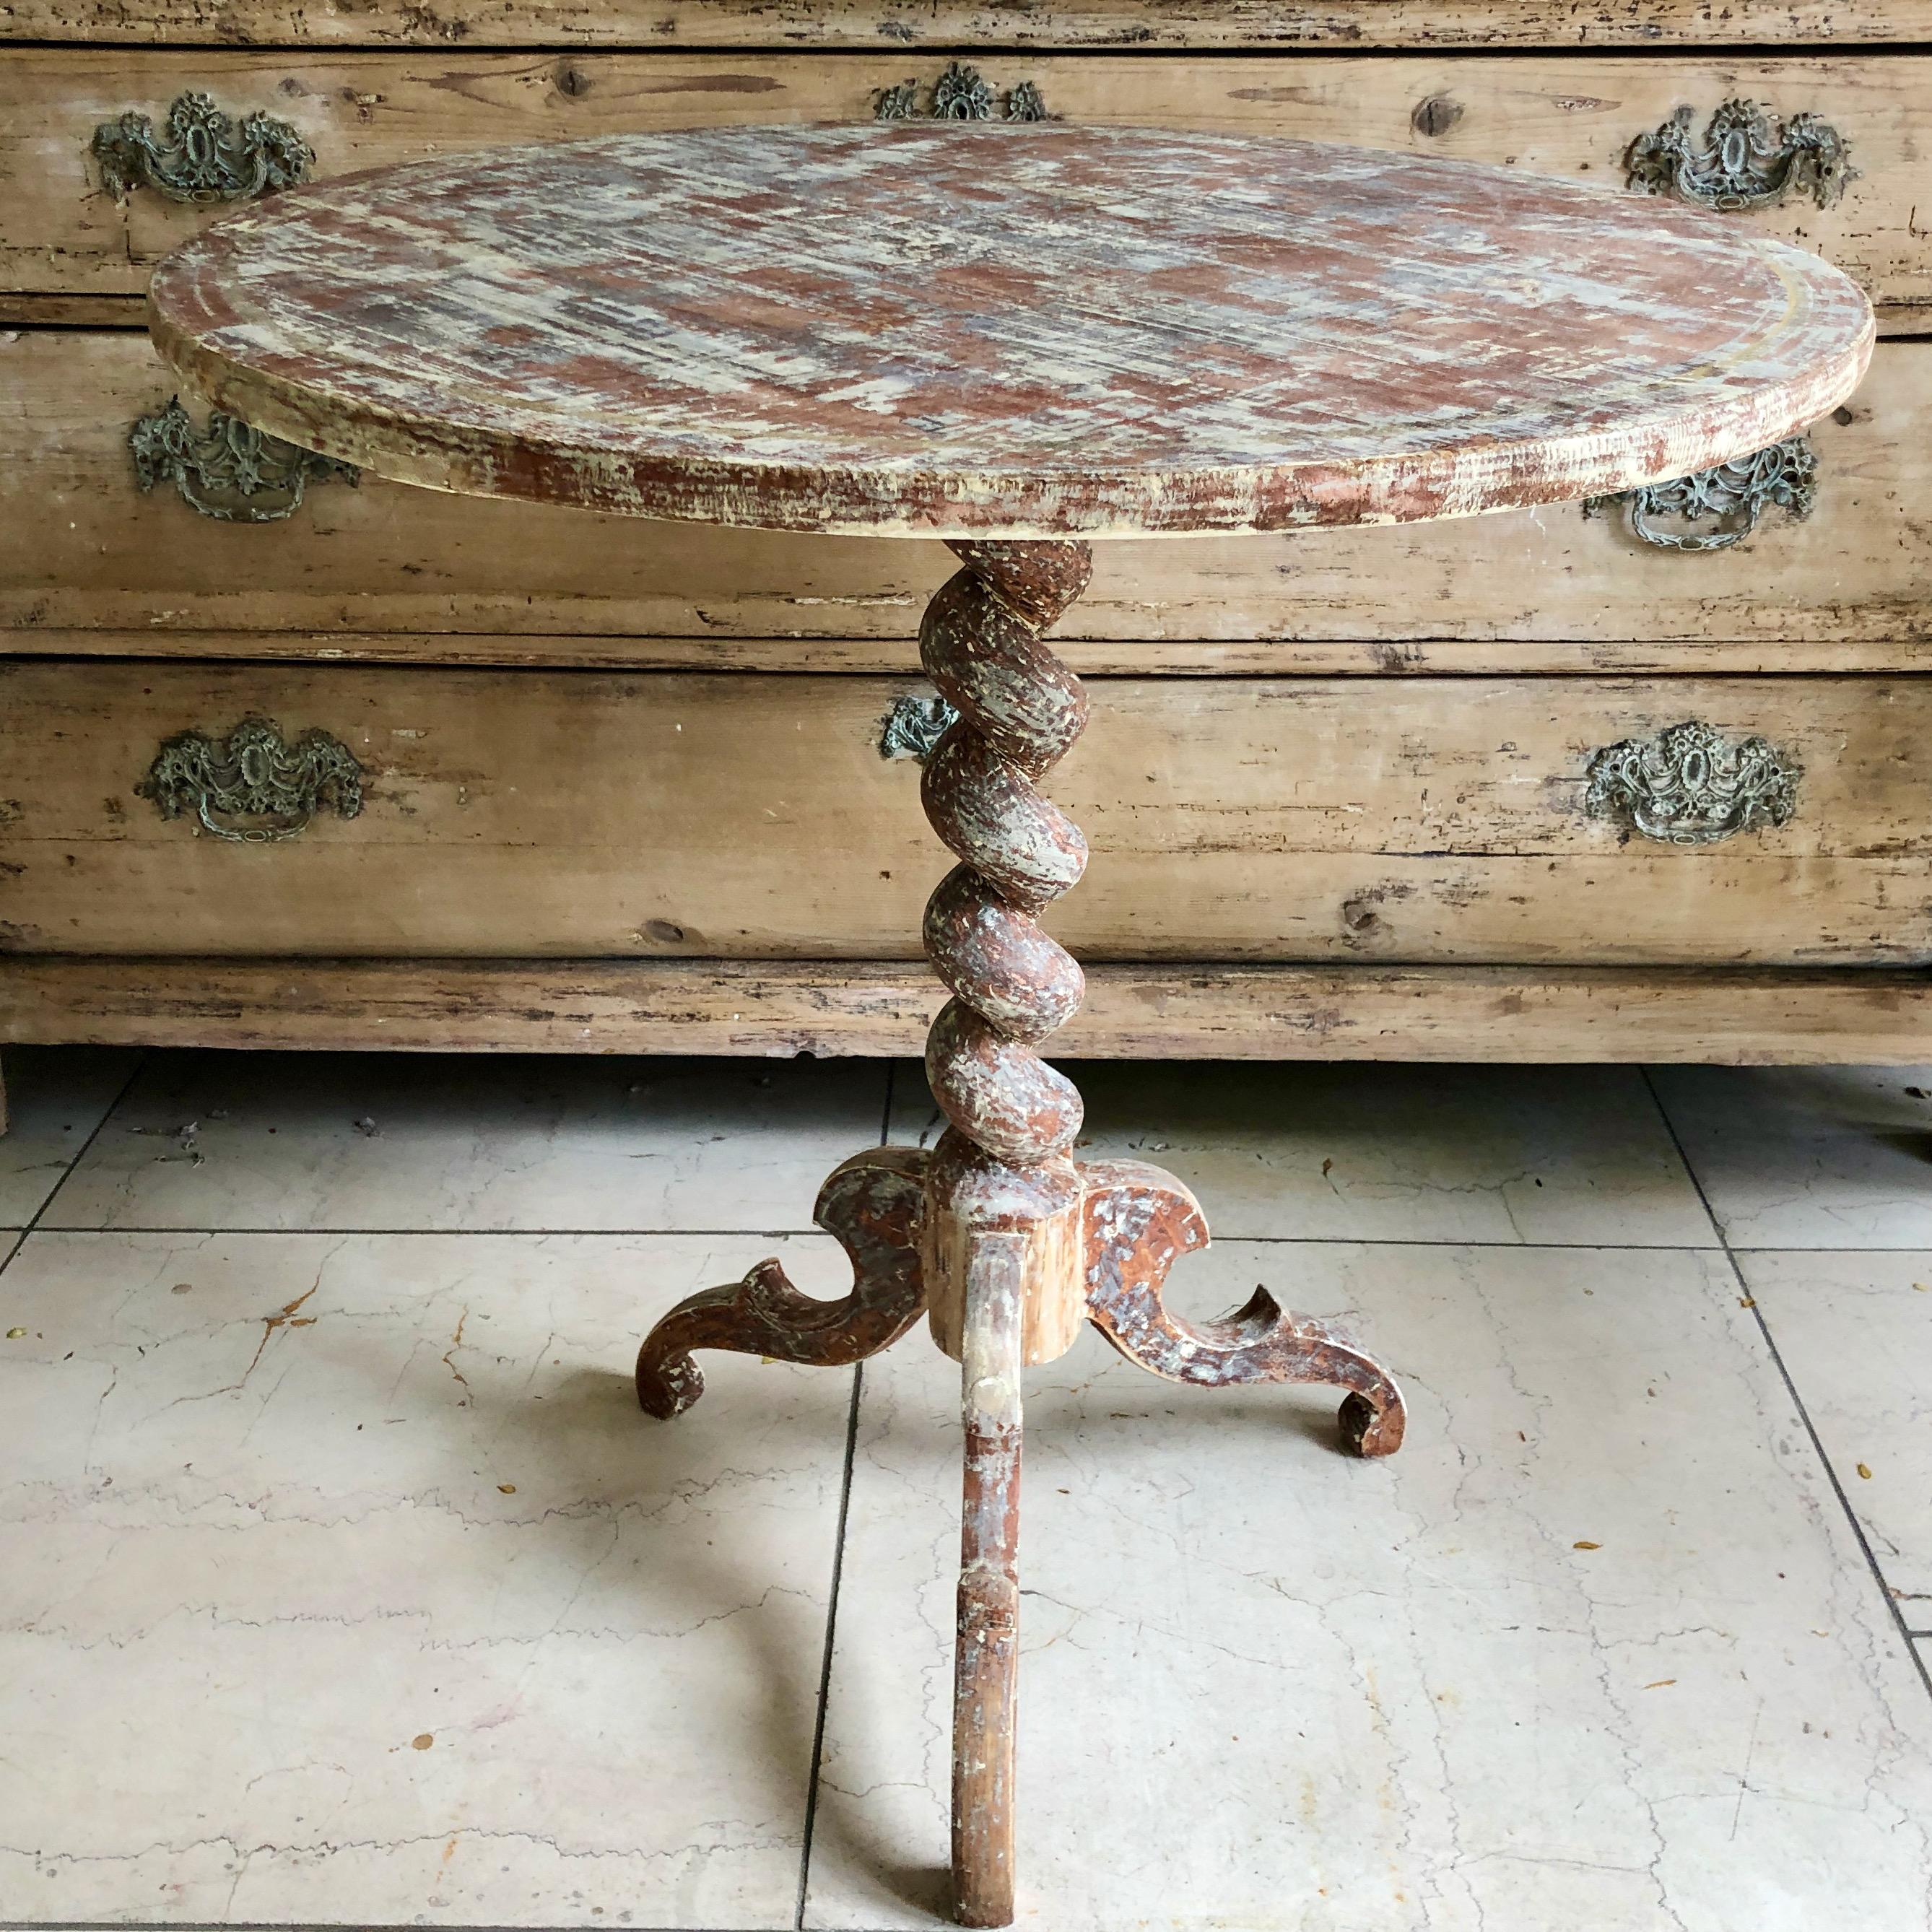 19th century Swedish pedestal table with an intricately turned 